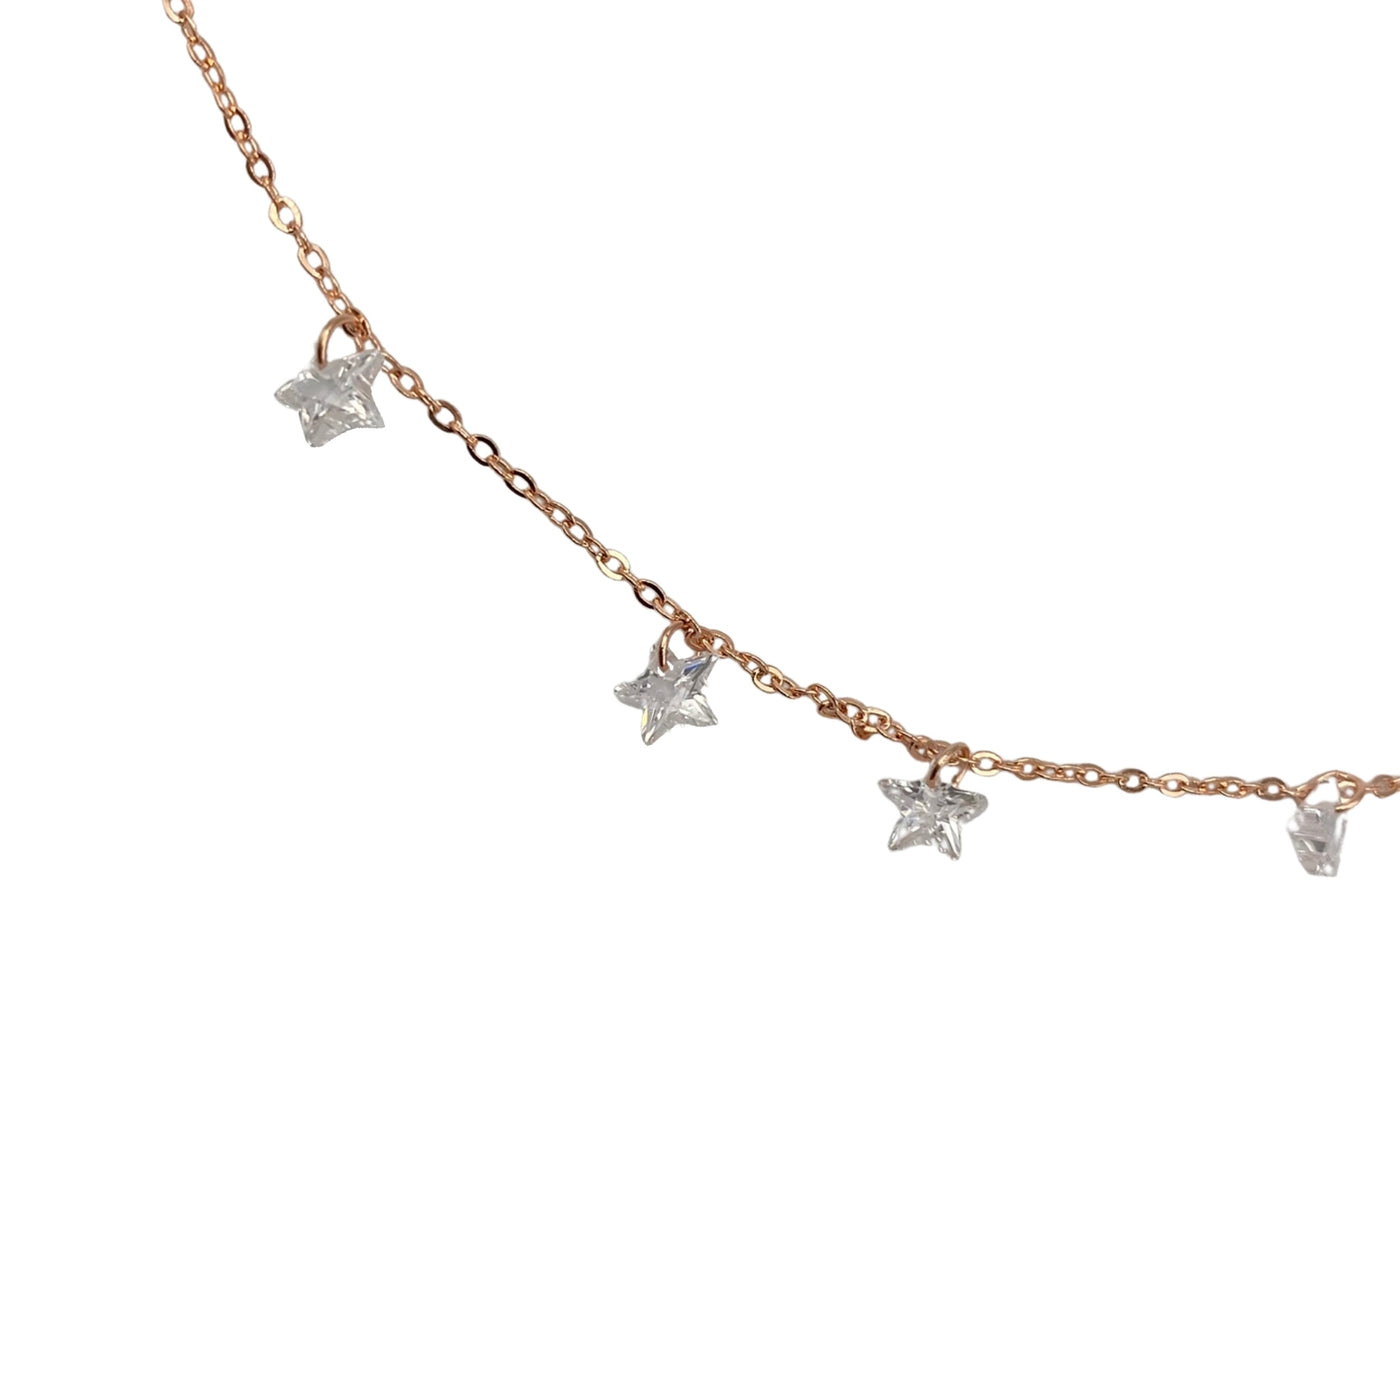 Silver necklace with zirconia stars charms